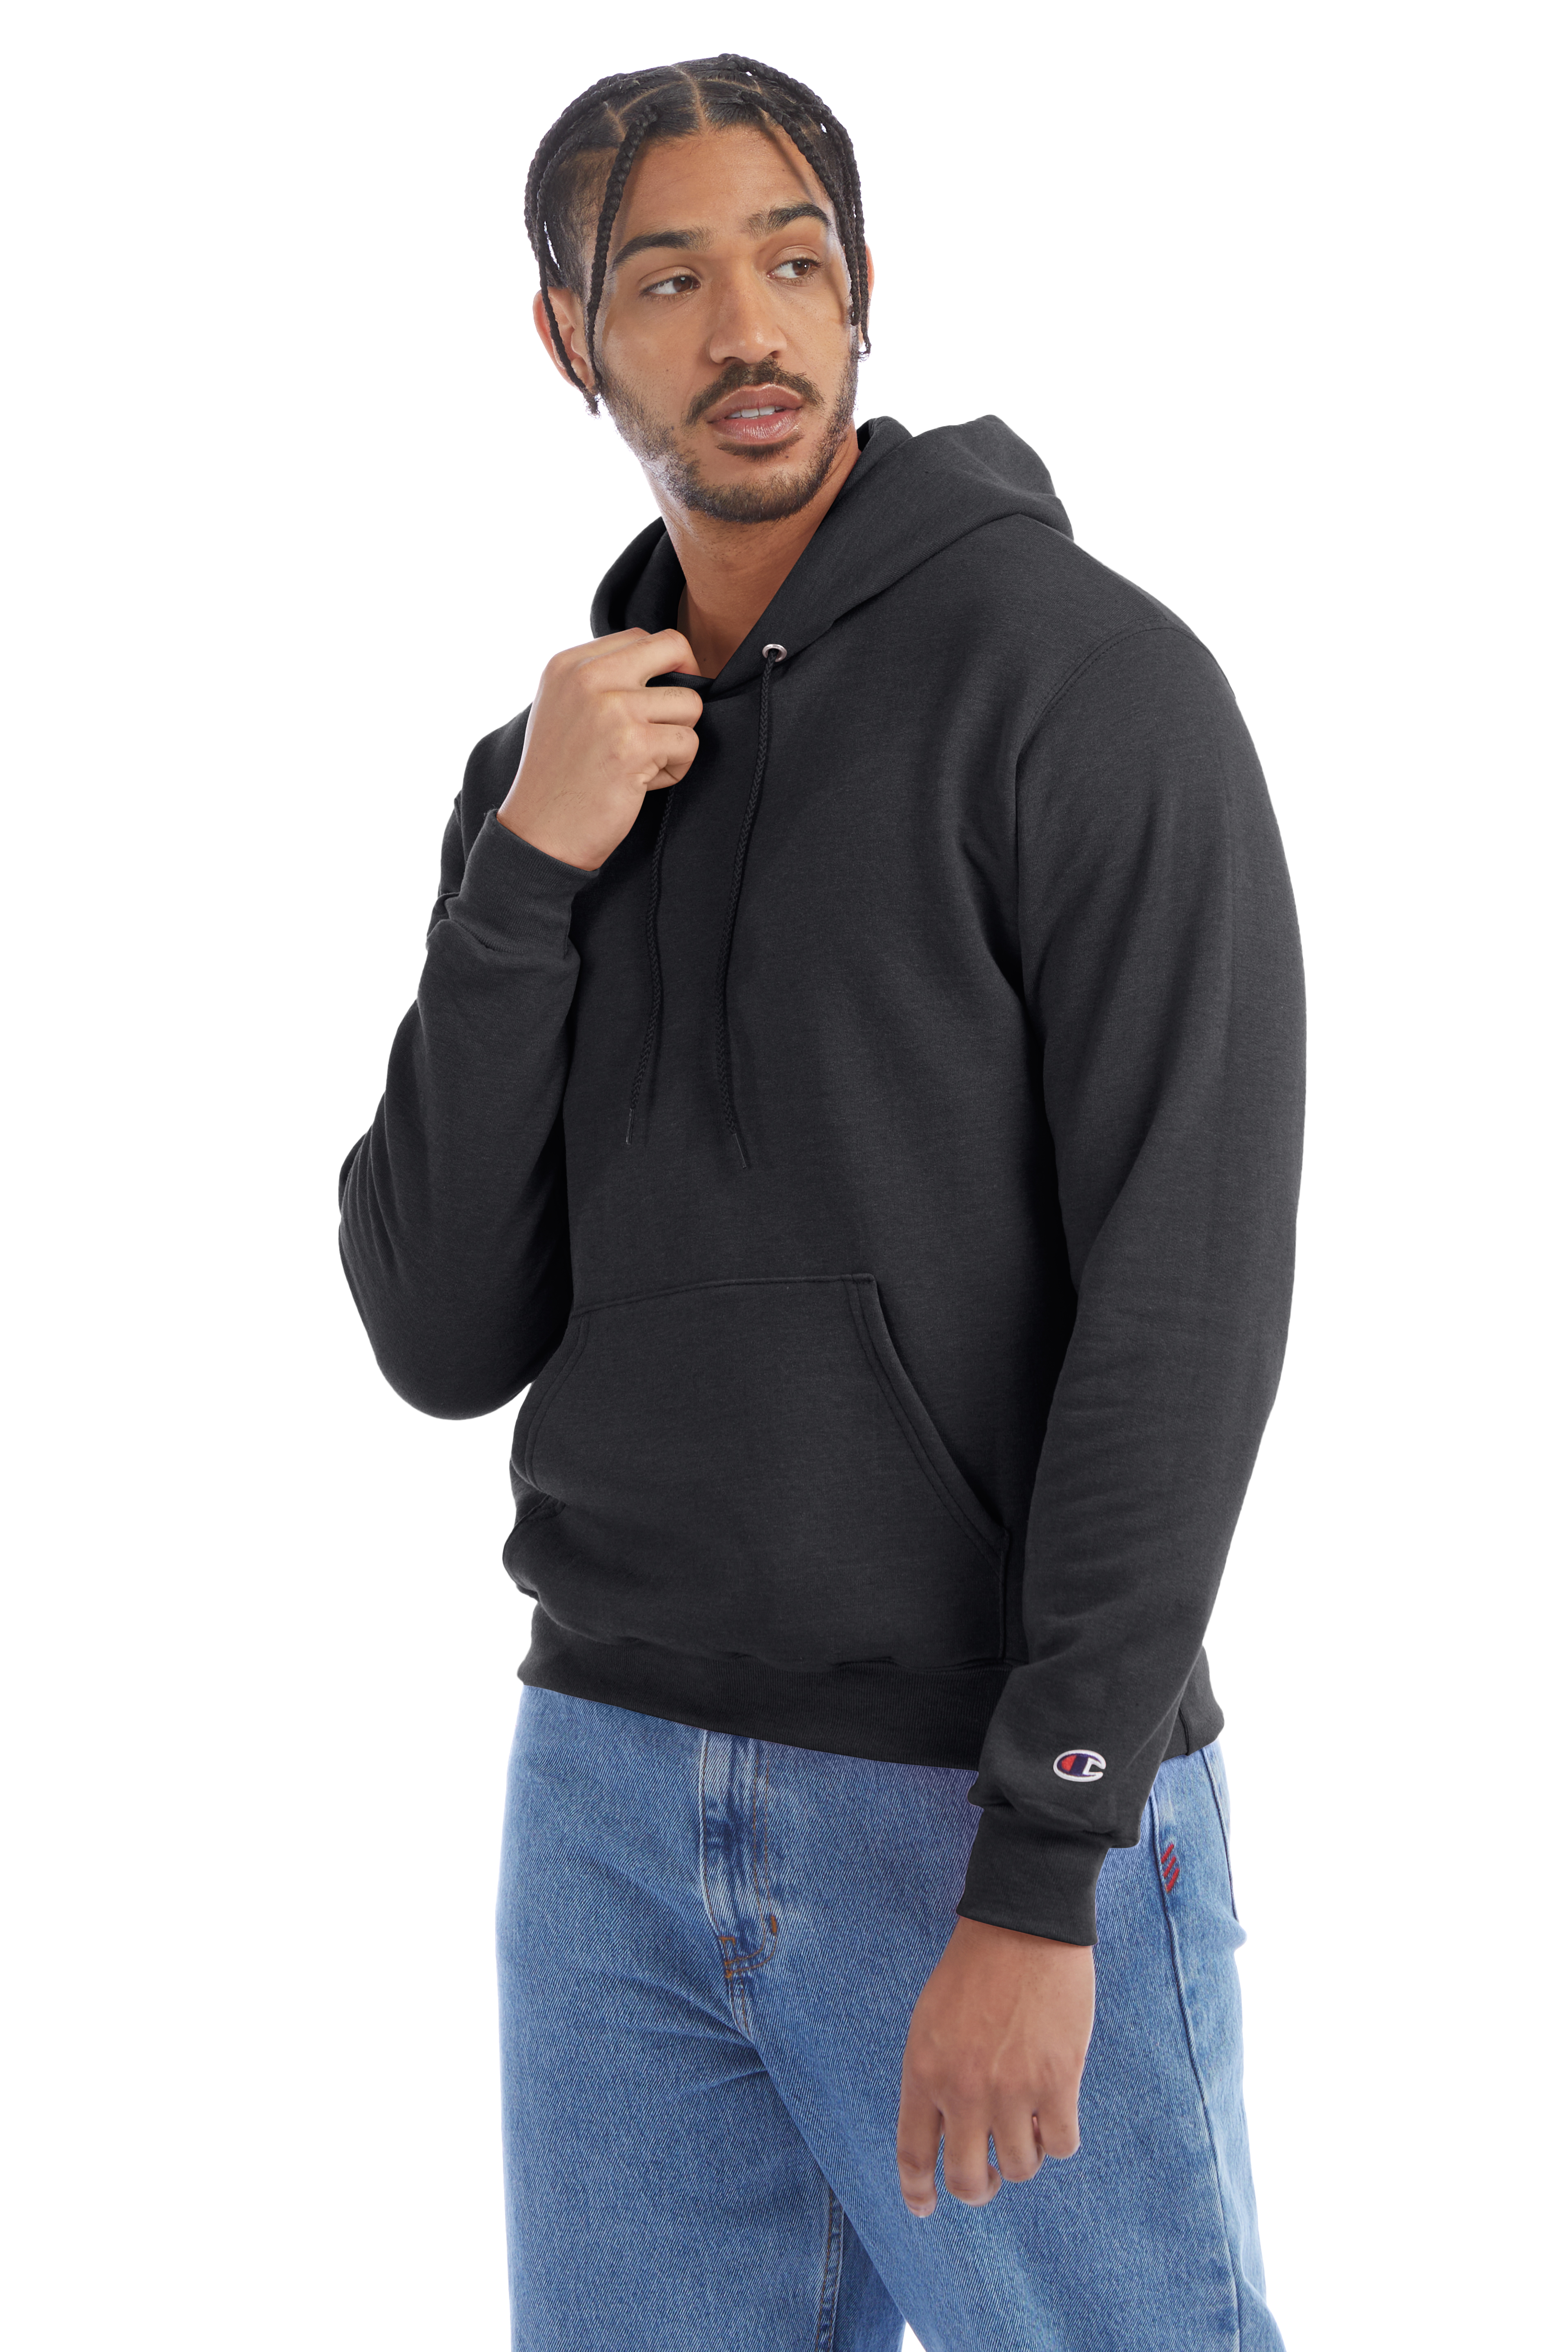 Champion S700 Adult 9 Oz. Double Dry Eco® Pullover Hood | Jiffy Shirts